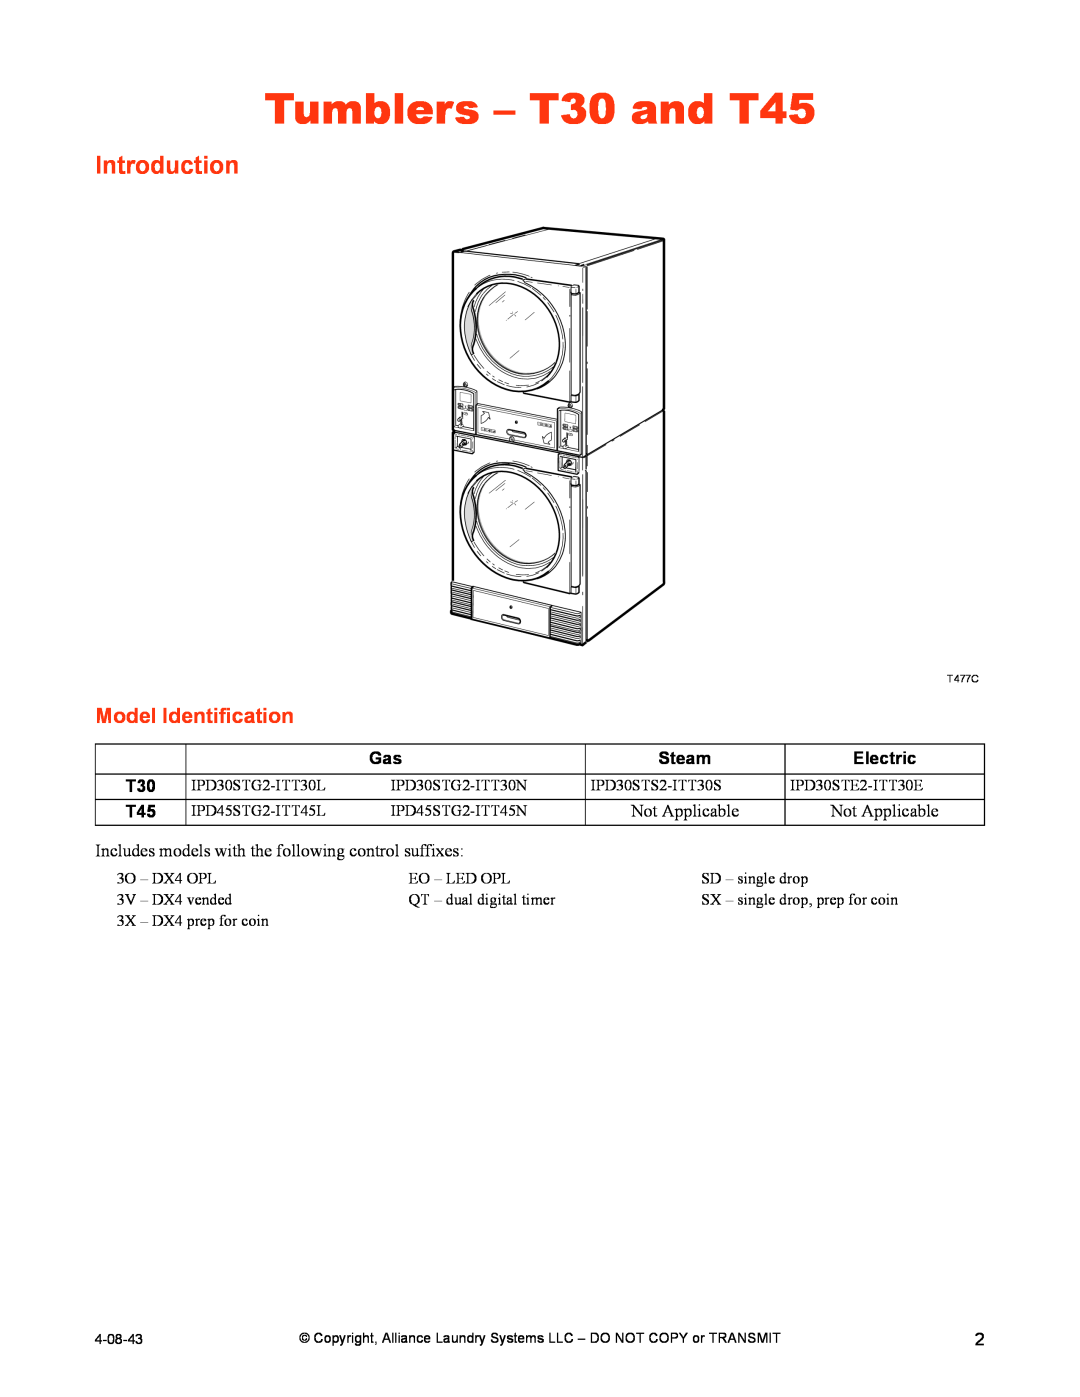 IPSO installation manual Tumblers - T30 and T45, Introduction, Model Identification 